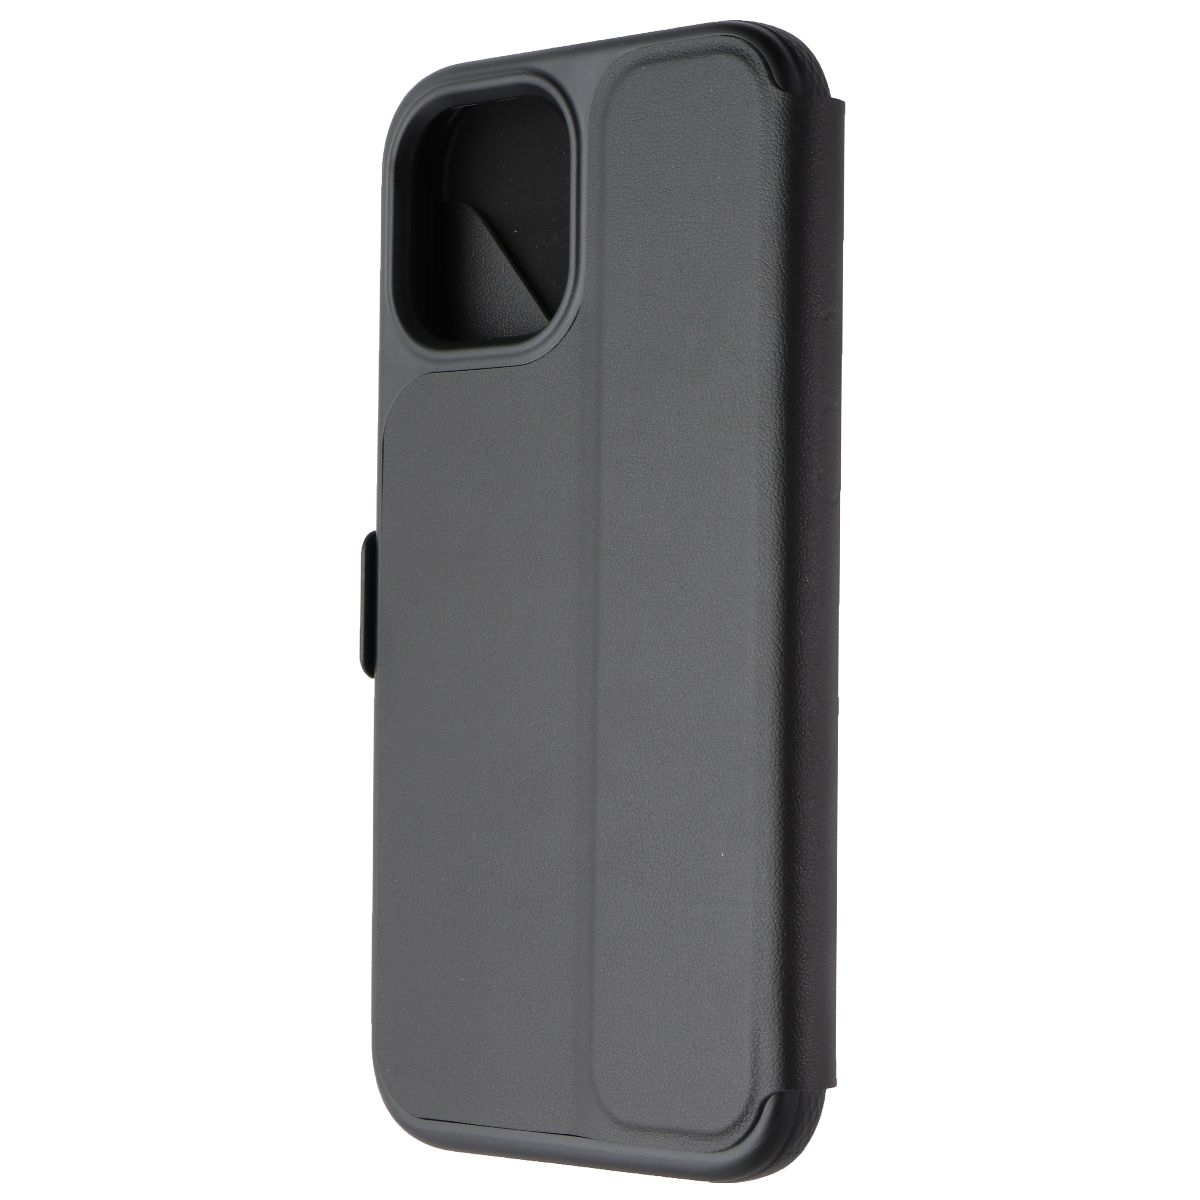 Tech21 Evo Wallet Case For Apple IPhone 12 Pro Max - Black (Refurbished)